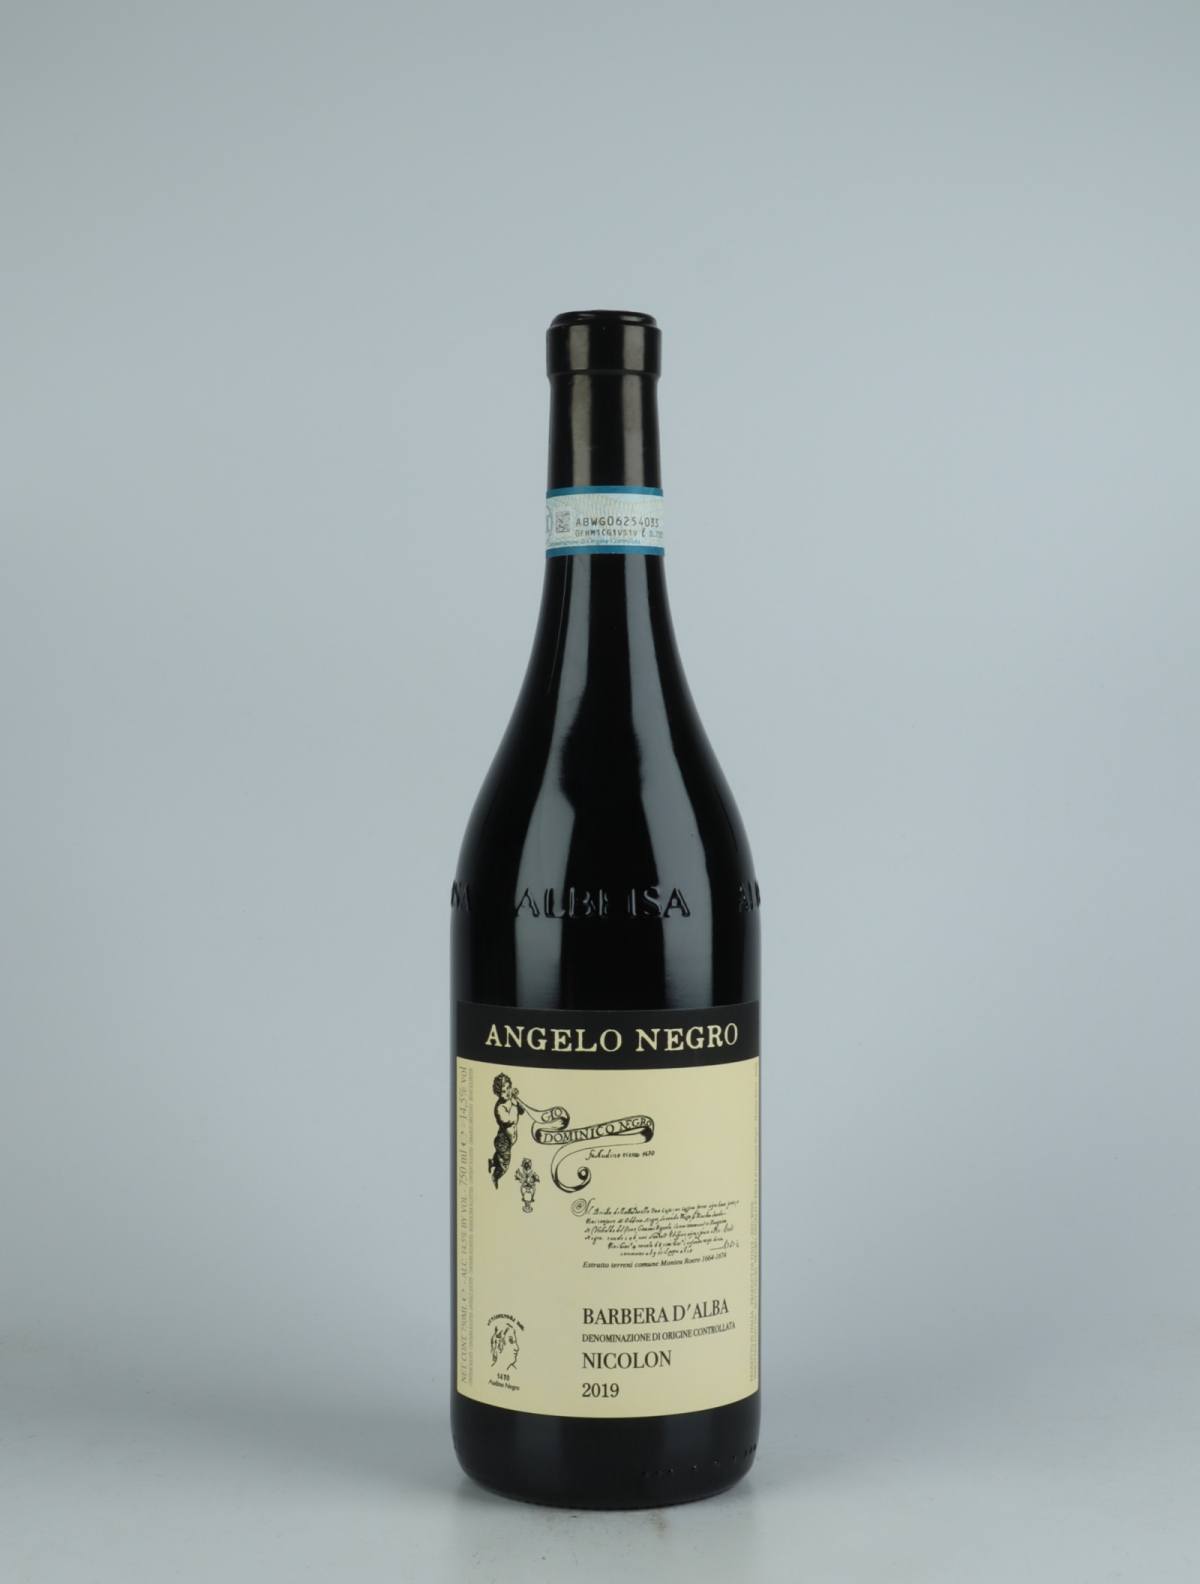 A bottle 2019 Barbera d'Alba - Nicolon Red wine from Angelo Negro, Piedmont in Italy